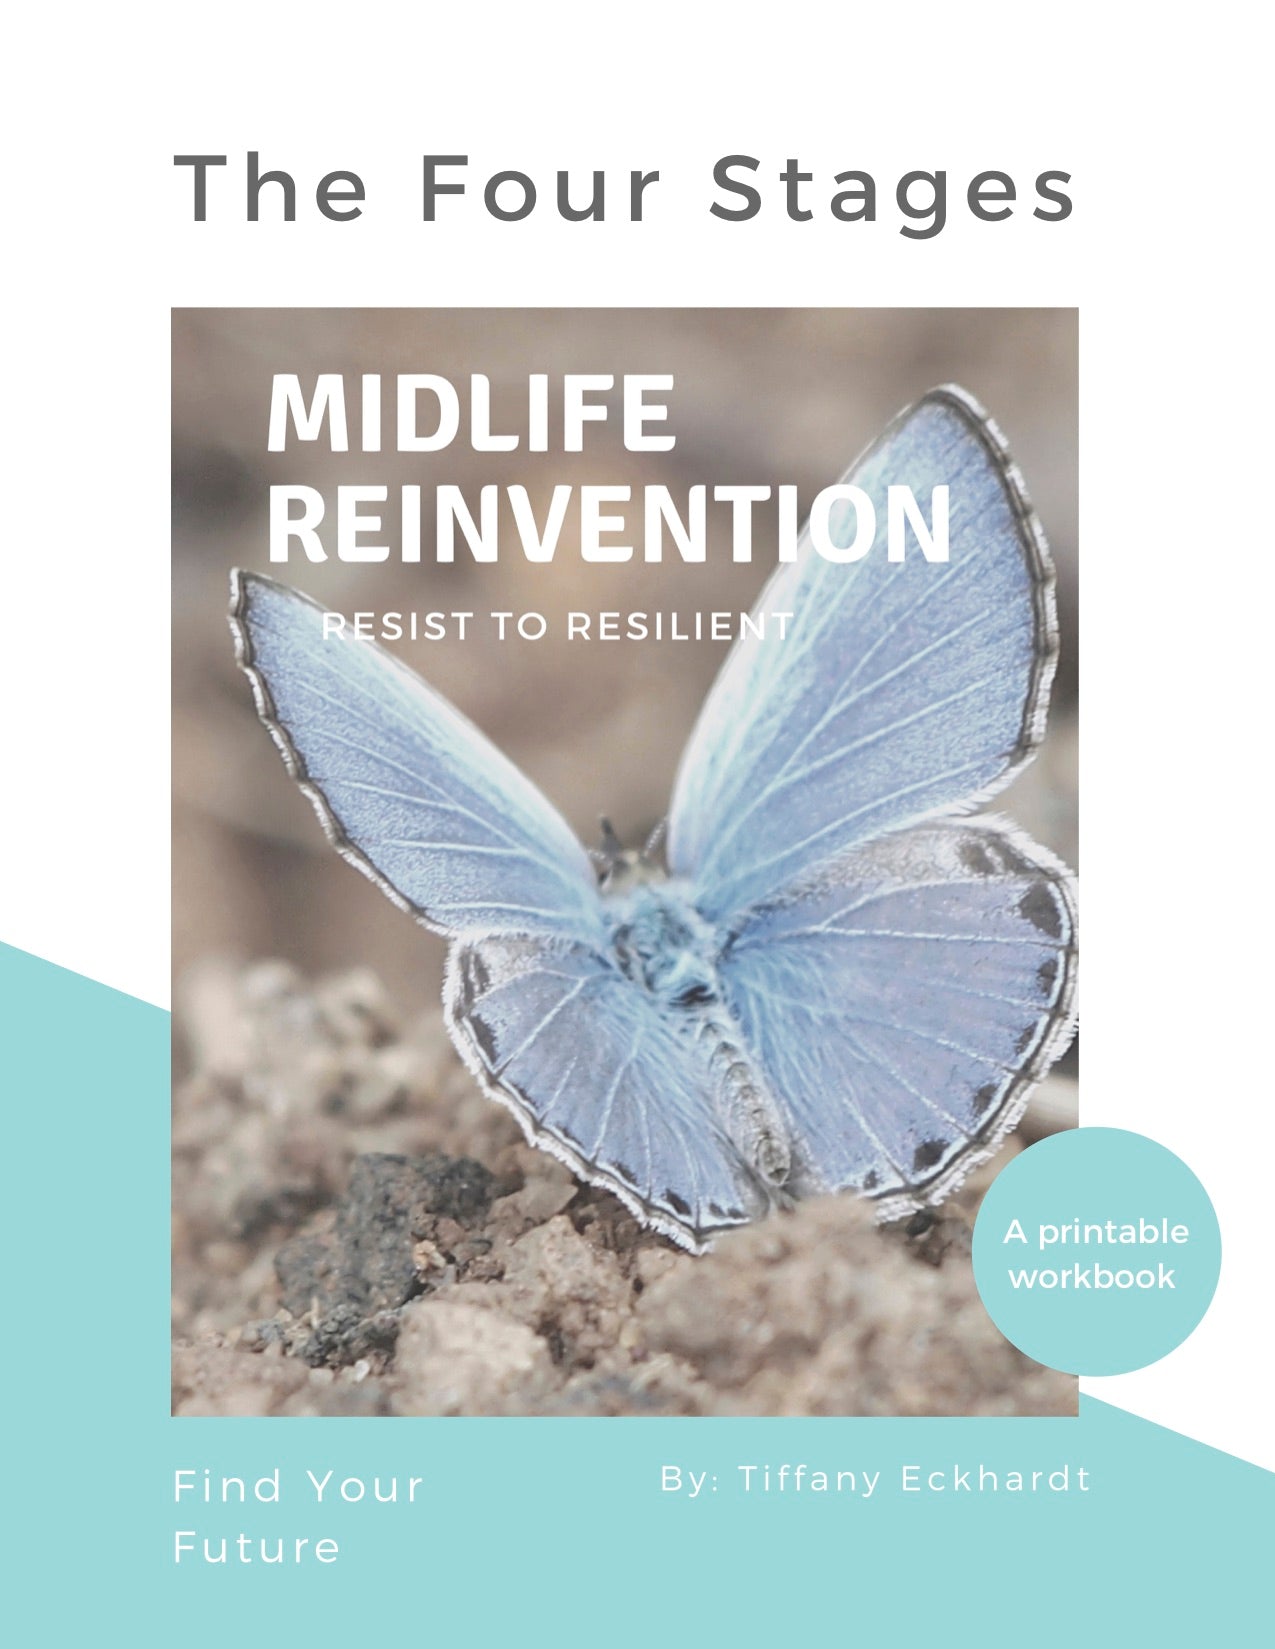 The Four Stages Of Reinvention E-Journal